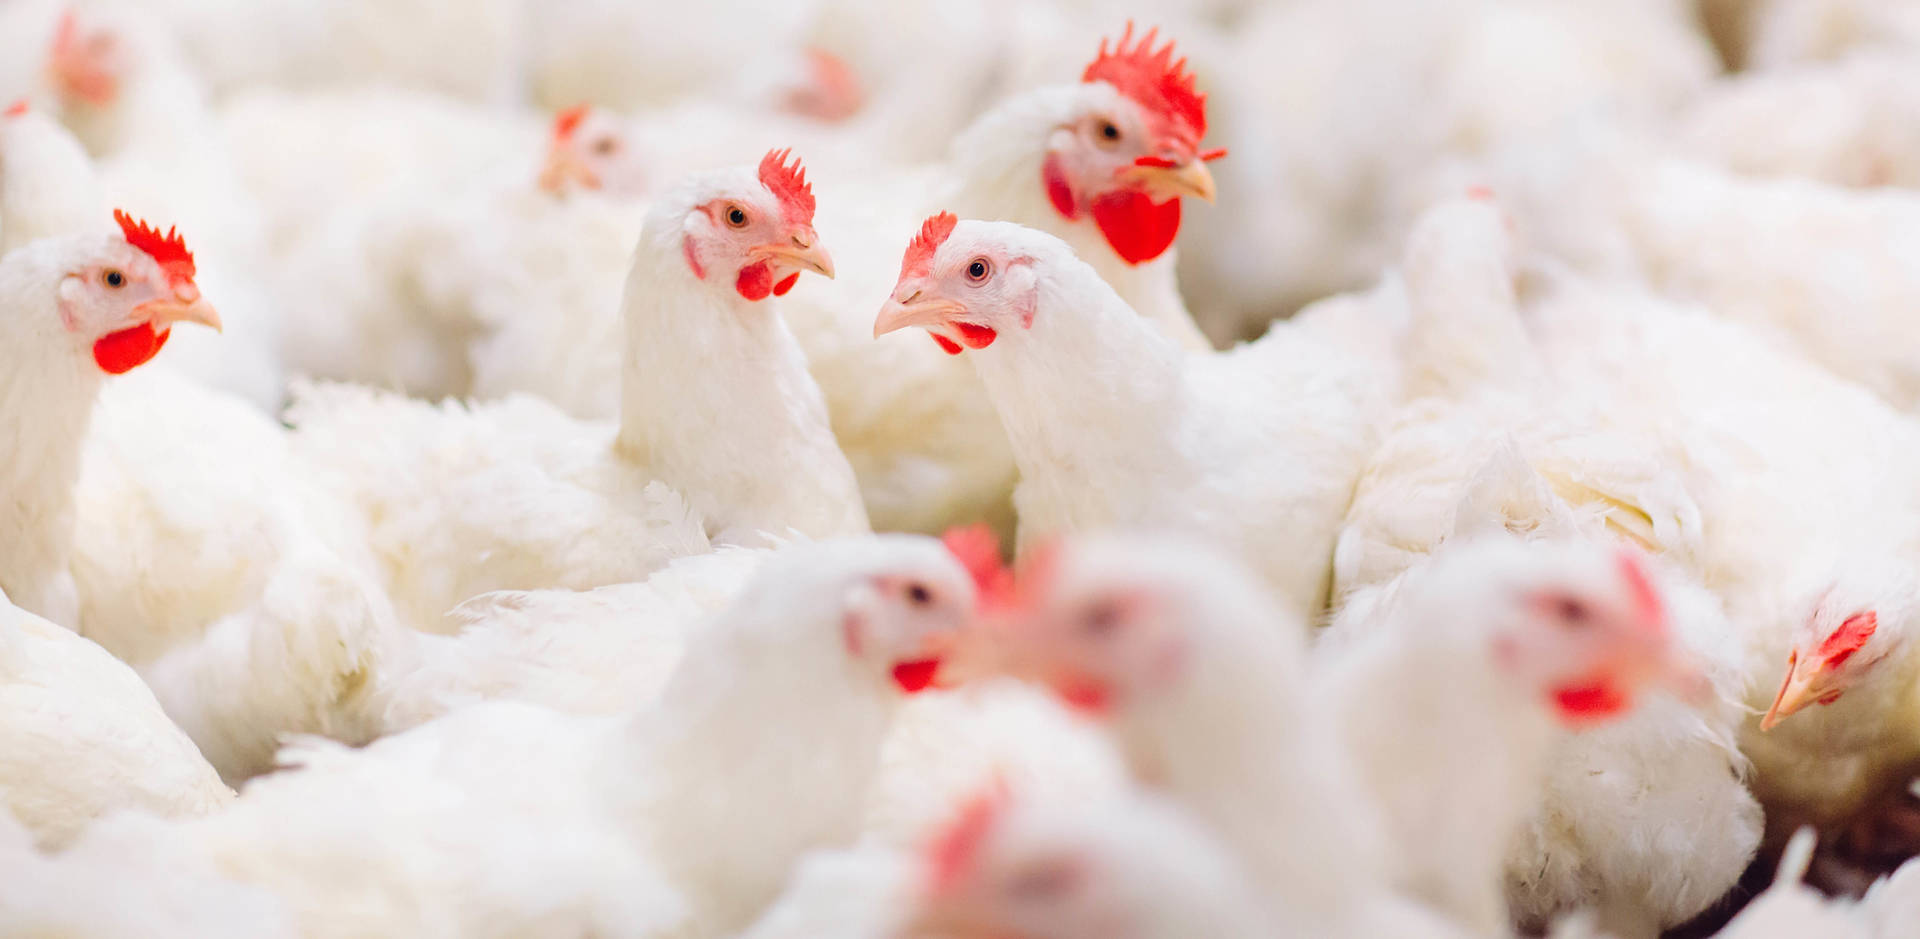 Chicken diseases do not spread to humans, clarifies Nepal Veterinary Association